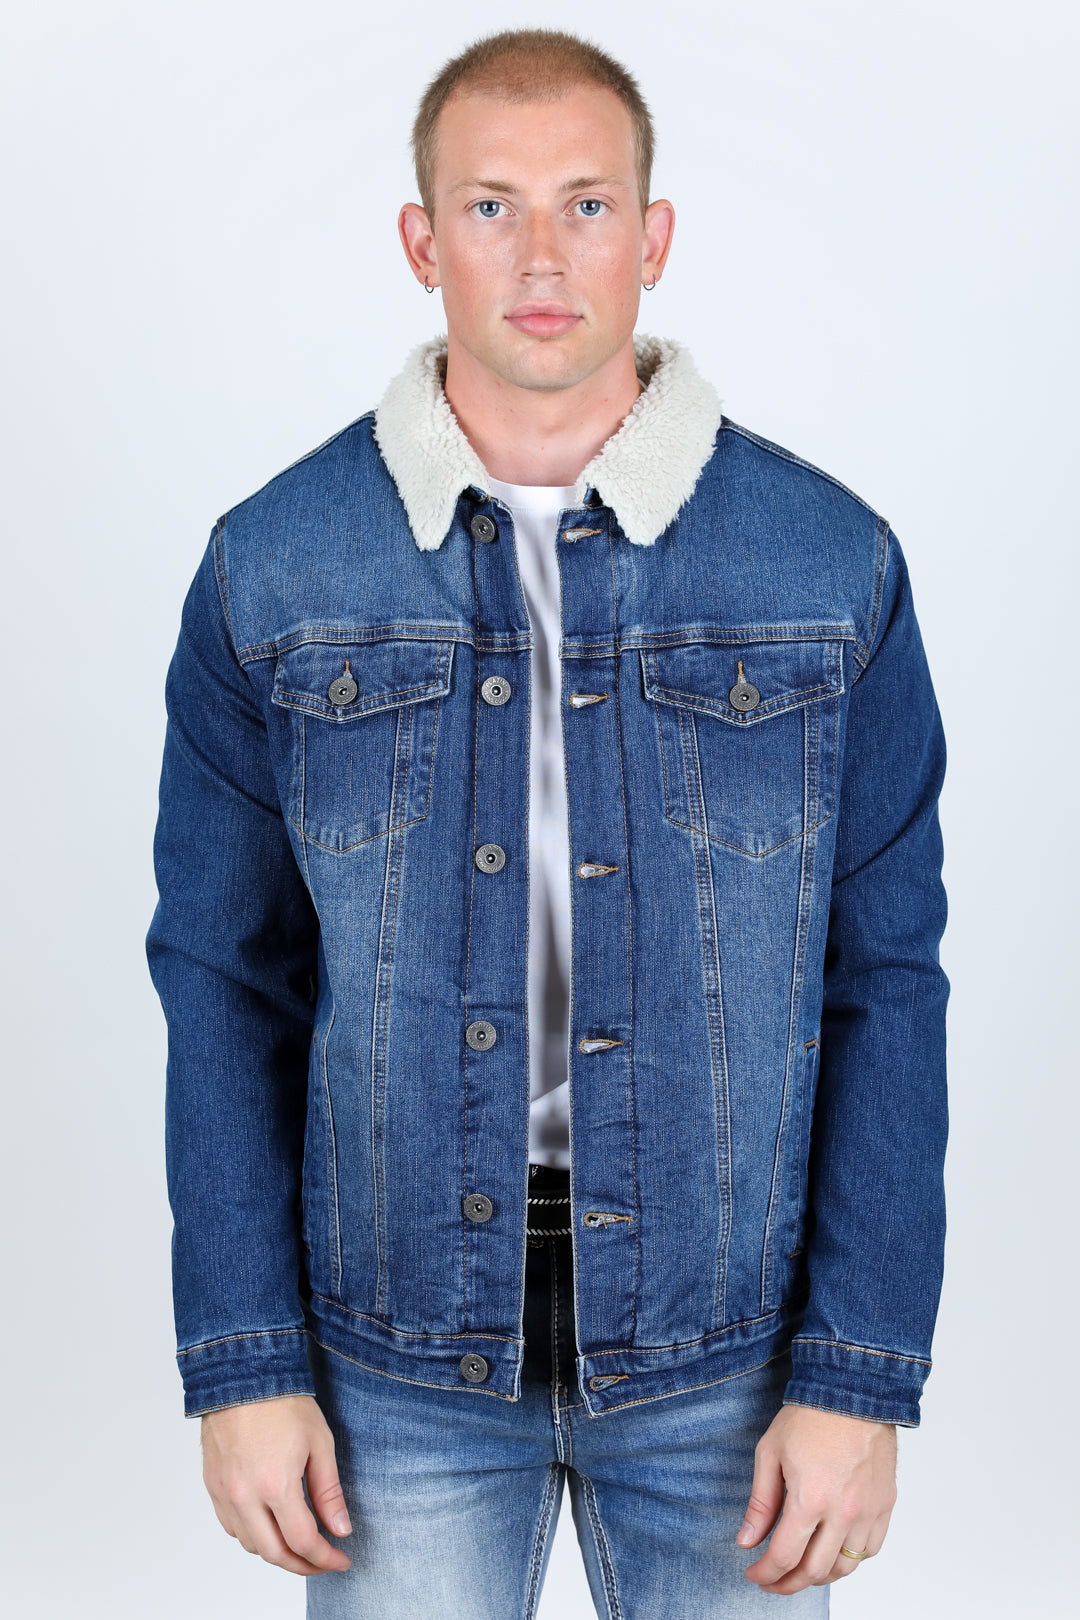 Mens Sherpa Lined Denim Jacket - Stay Warm and Stylish this Winter ...